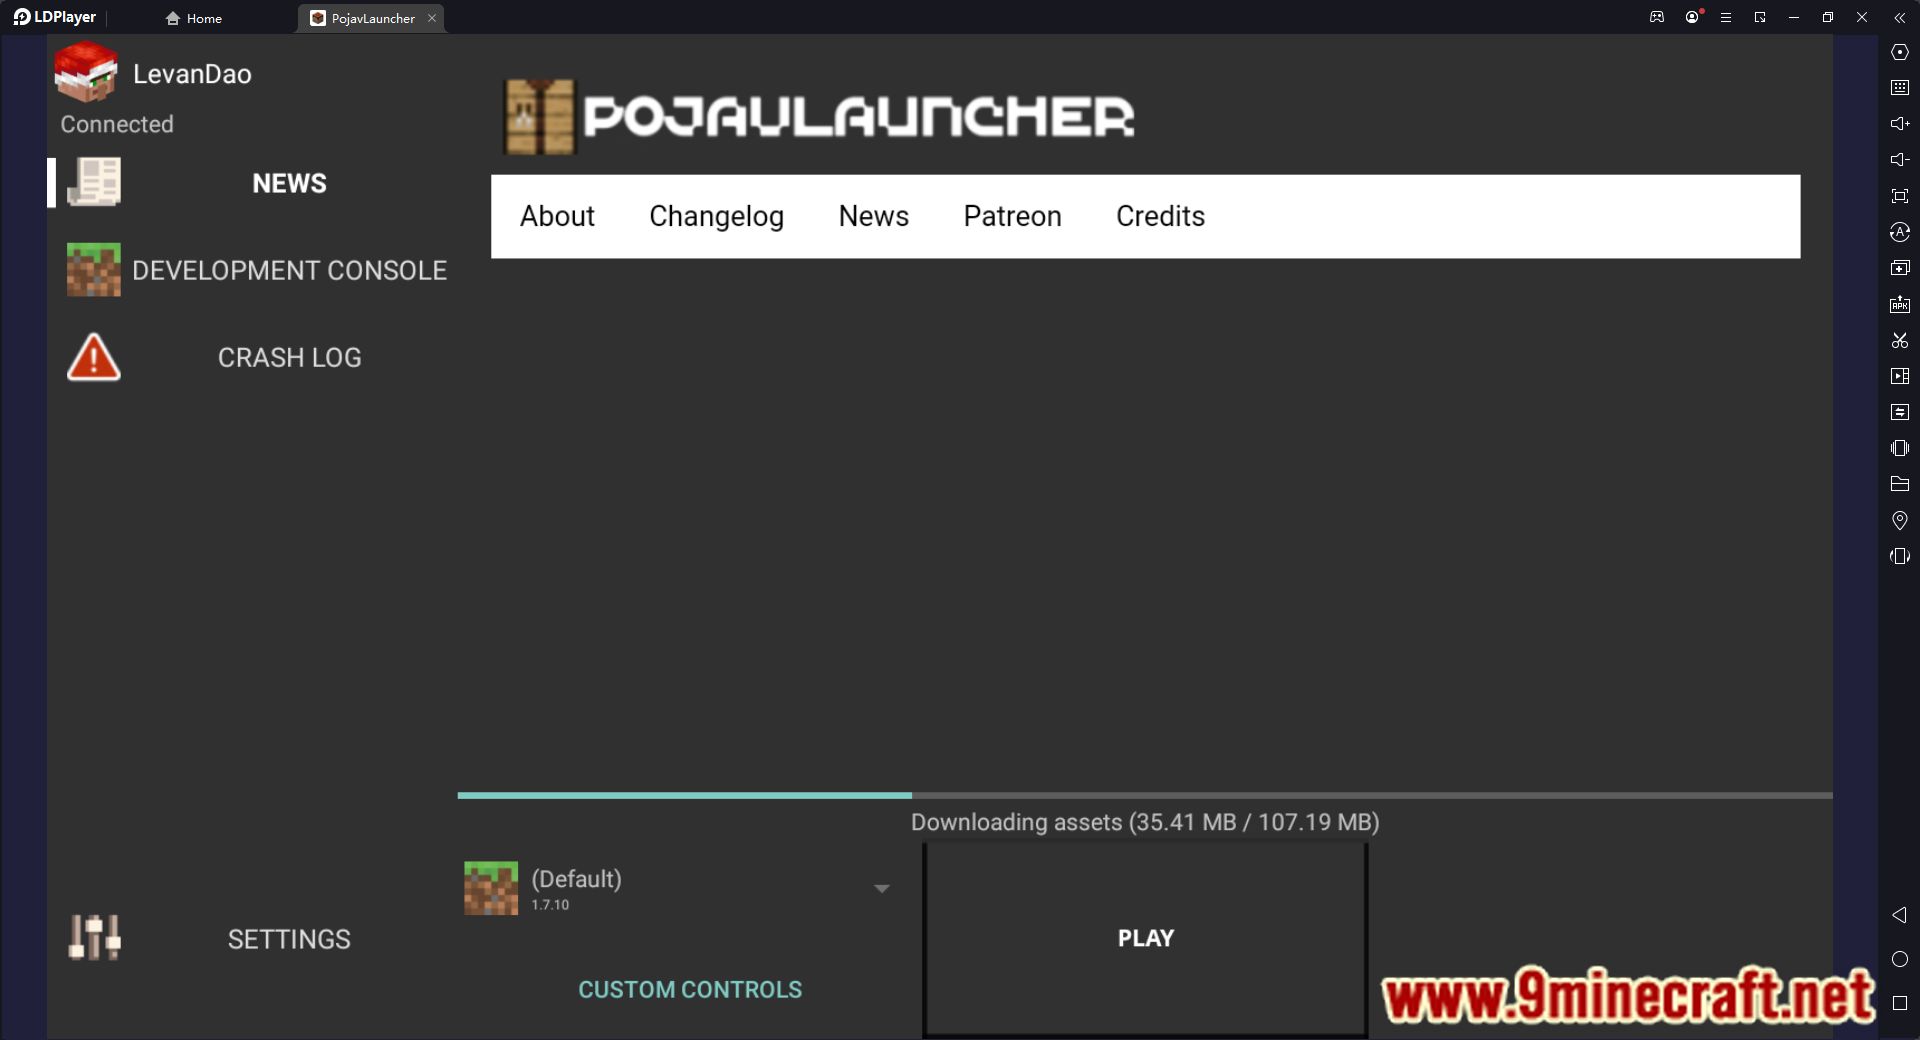 PojavLauncher (1.20.4, 1.19.4) - Free APK, IPA Launcher for Android, iOS 4